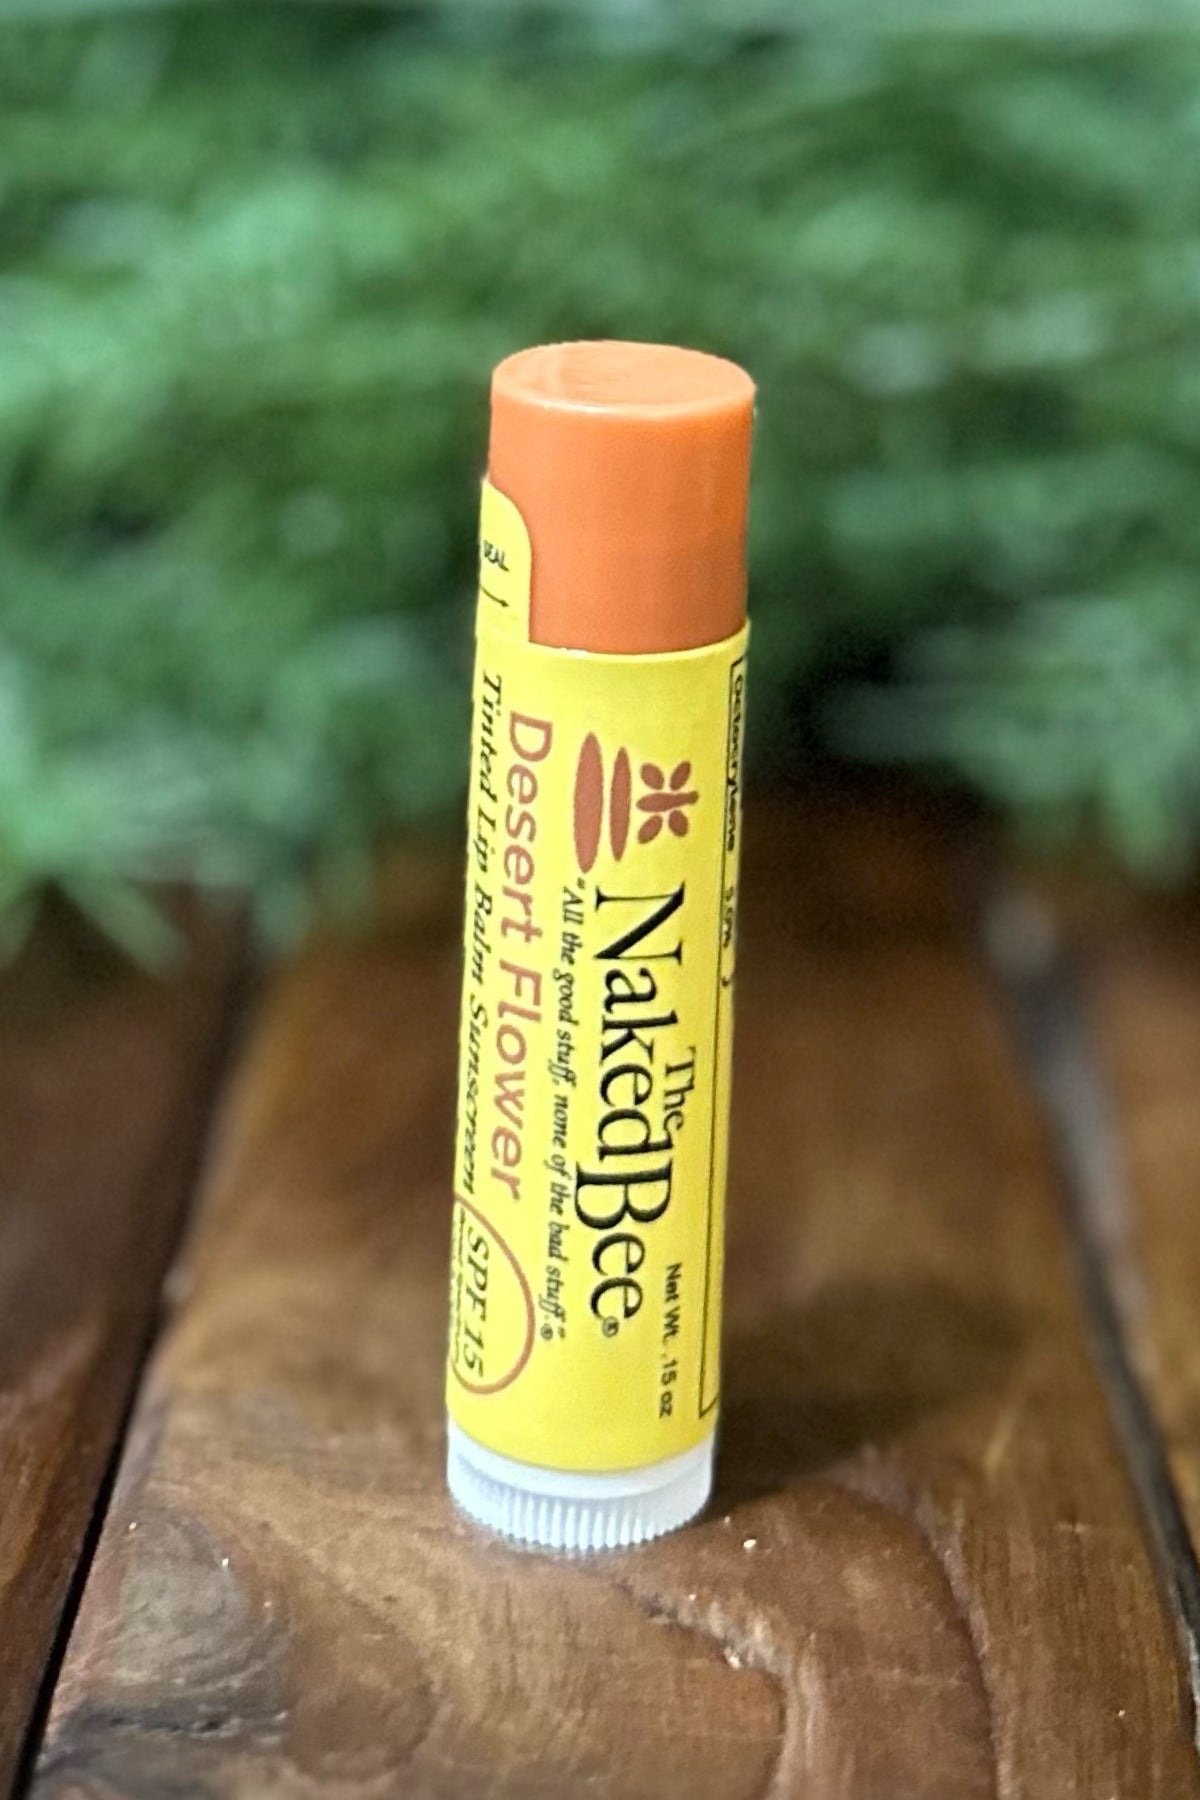 SPF 15 Orange Blossom Honey Tinted Lip Balm in Desert Flower by Naked Bee-Gift-Naked Bee-Gallop 'n Glitz- Women's Western Wear Boutique, Located in Grants Pass, Oregon